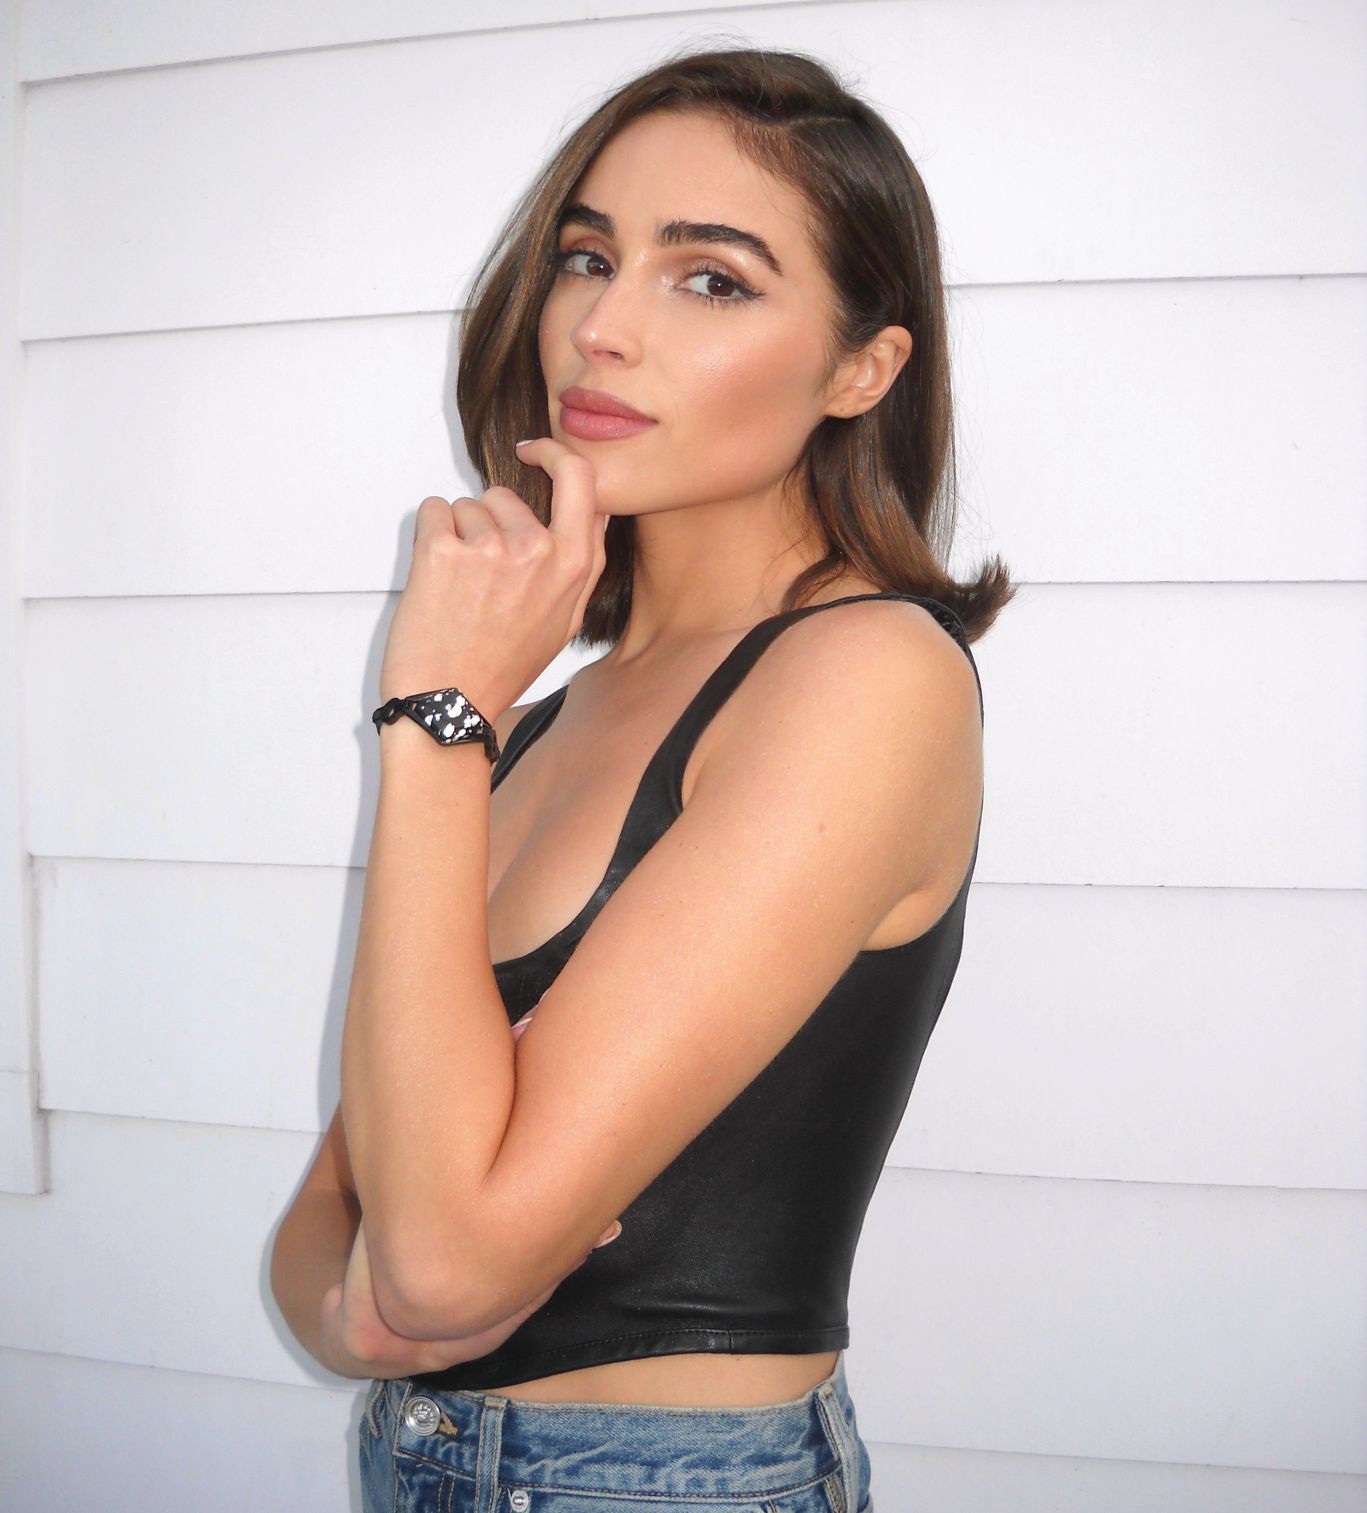 Influencer and actress Olivia Culpo sports the Bellabeat Ivy in Garden jet black. PHOTO COURTESY OF BELLABEAT